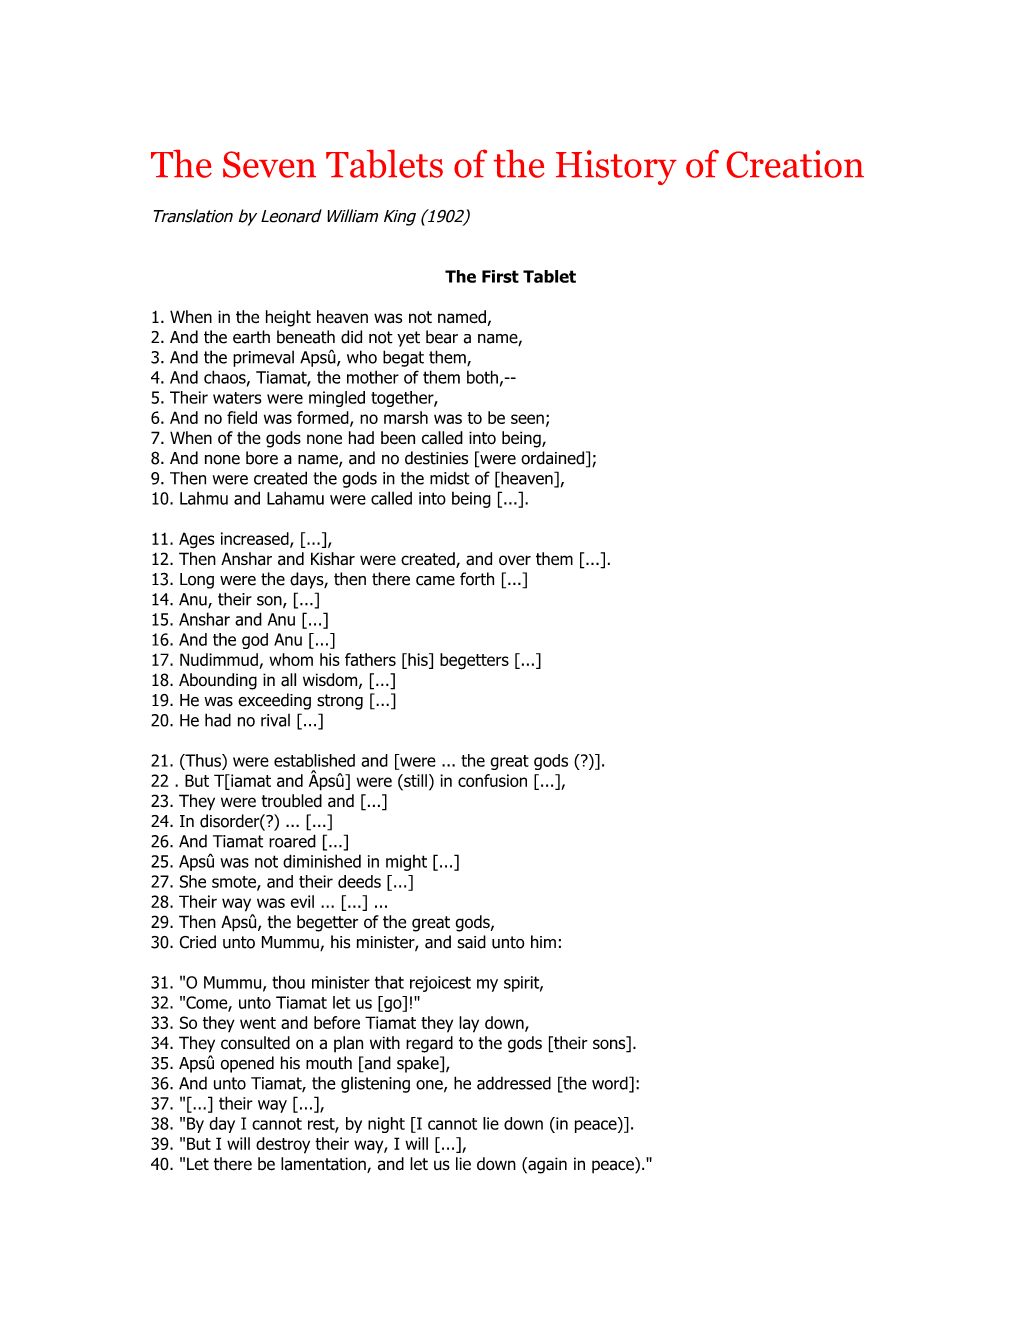 The Seven Tablets of the History of Creation